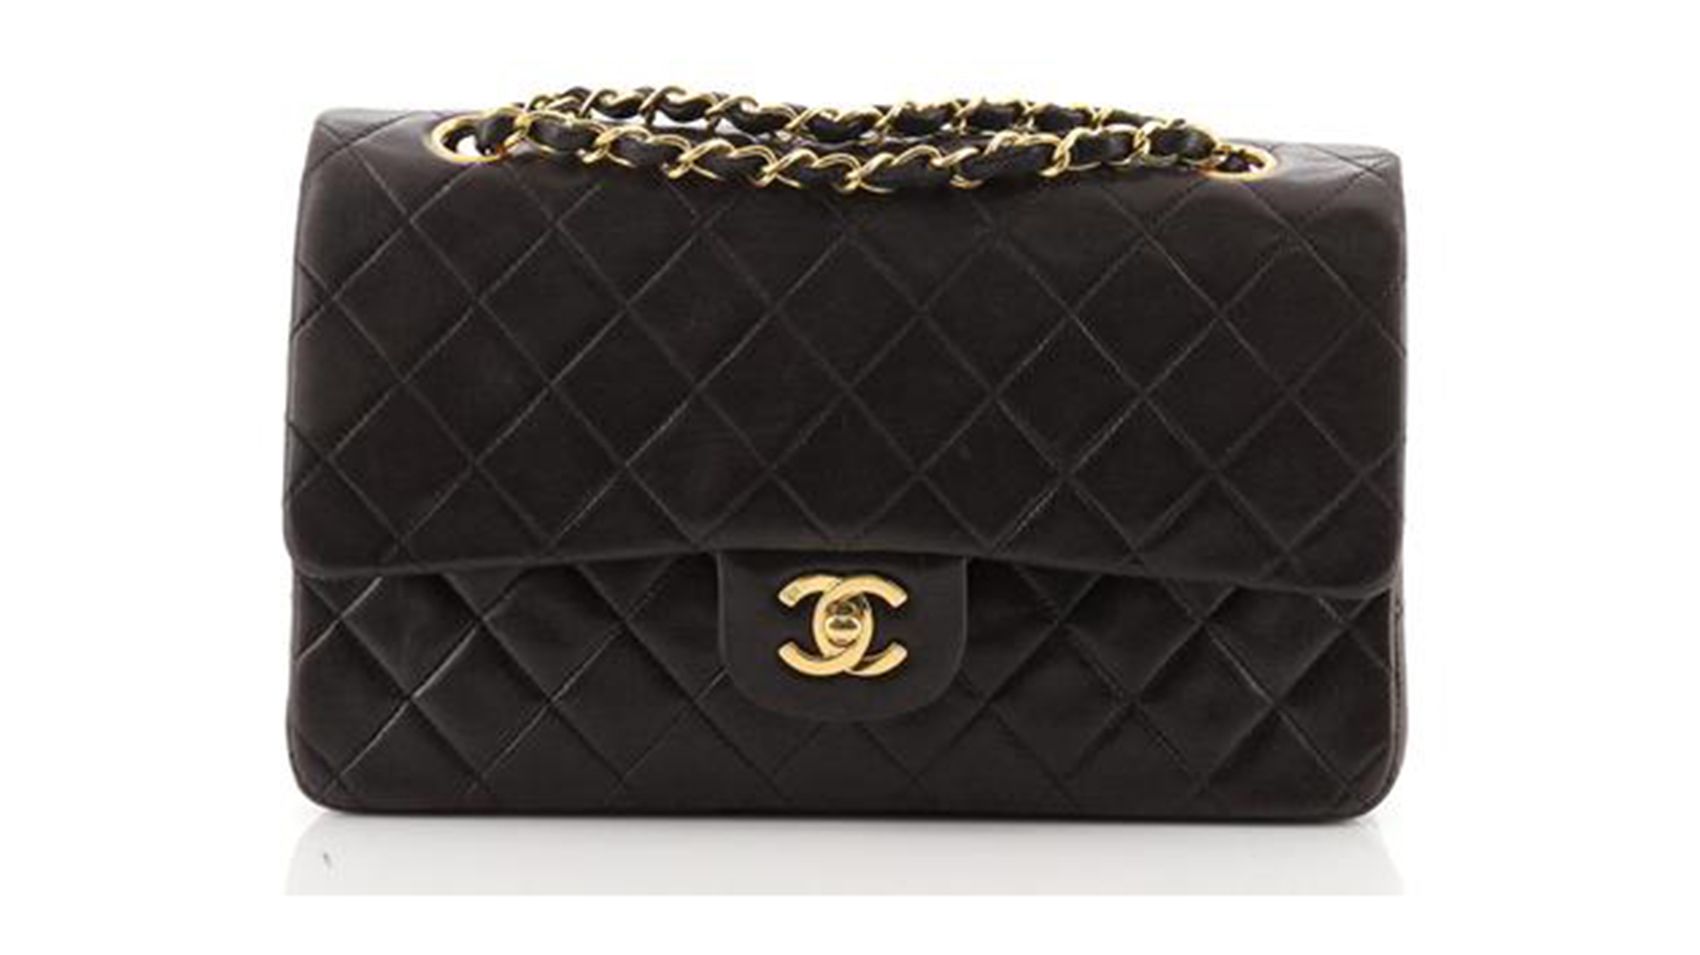 The Chanel Price Increase, Bags for Breakfast